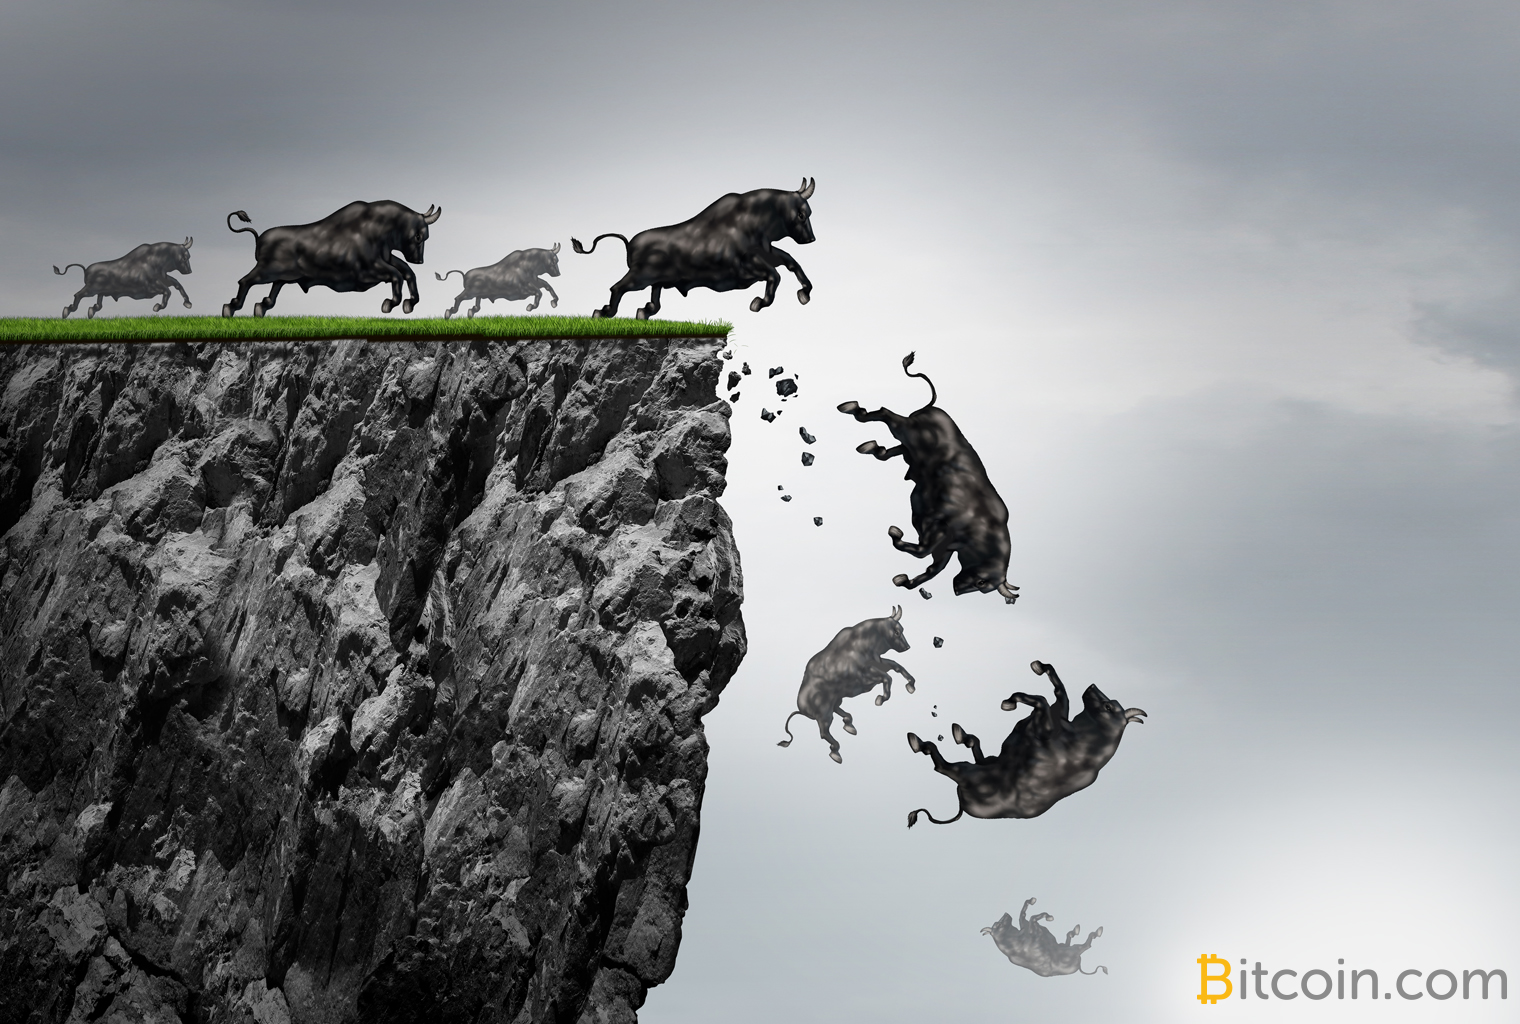 Markets Update: Crypto Bulls Lose Footing After Stablecoin Controversy